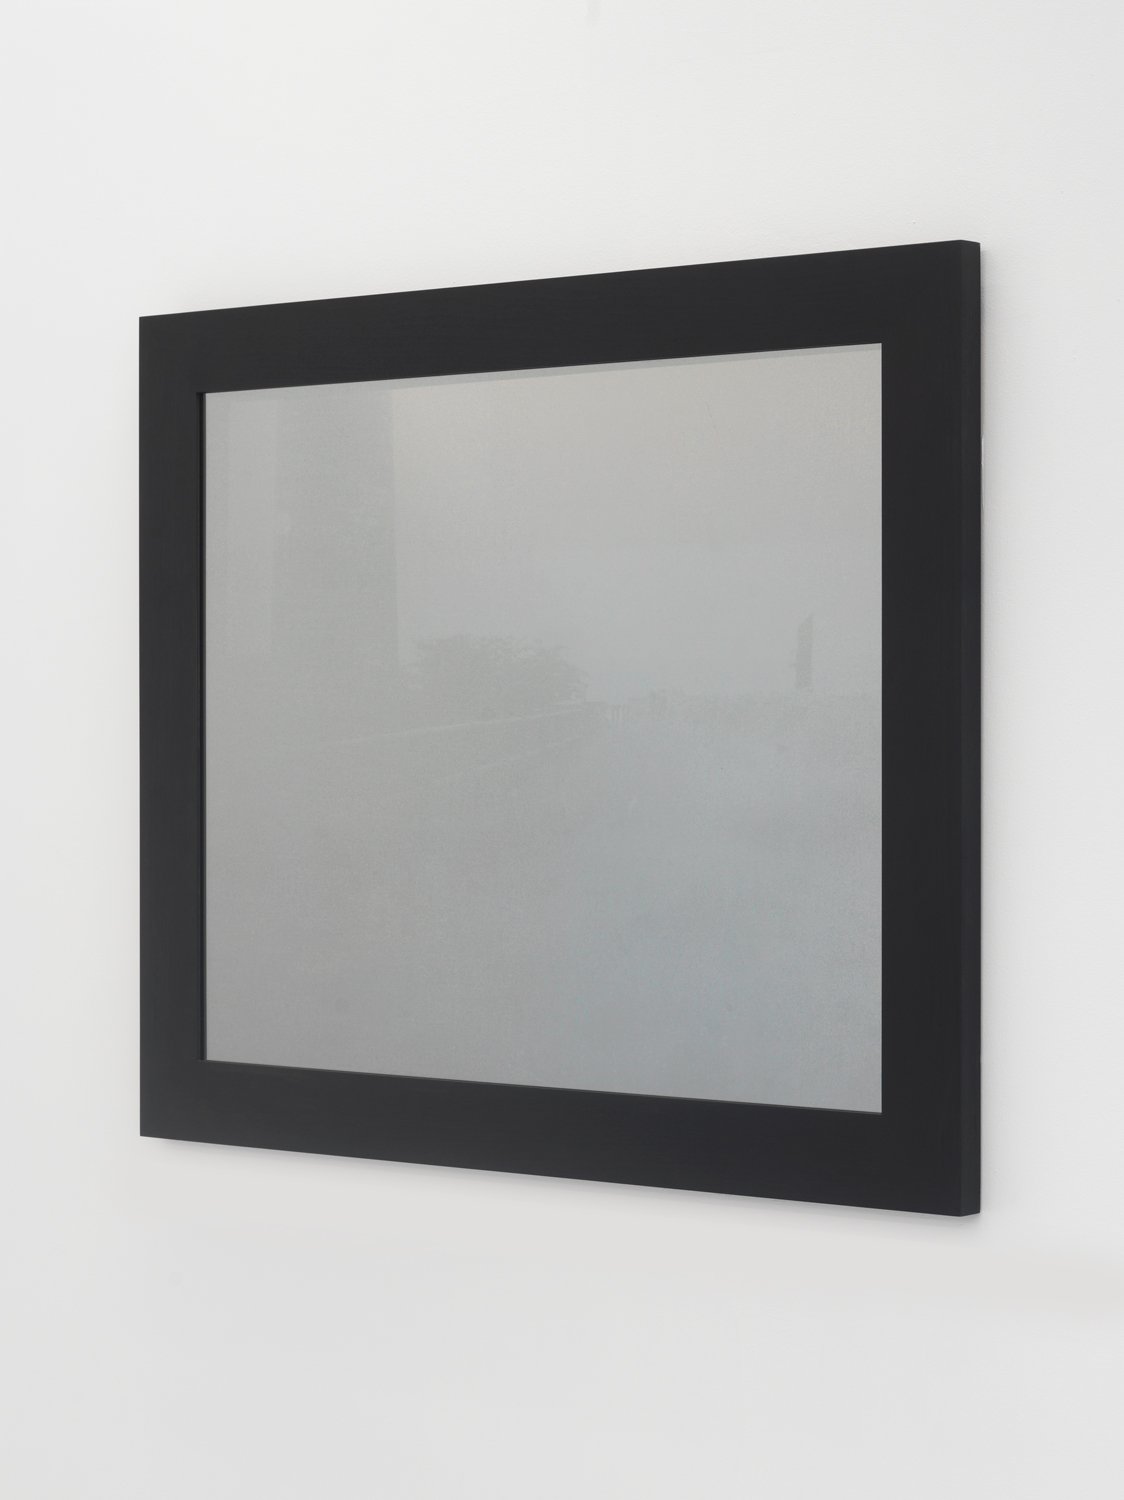 Peter Scott, Untitled (Highline, 2000), 2018, false wall, one way mirror, photograph, dimensions variable